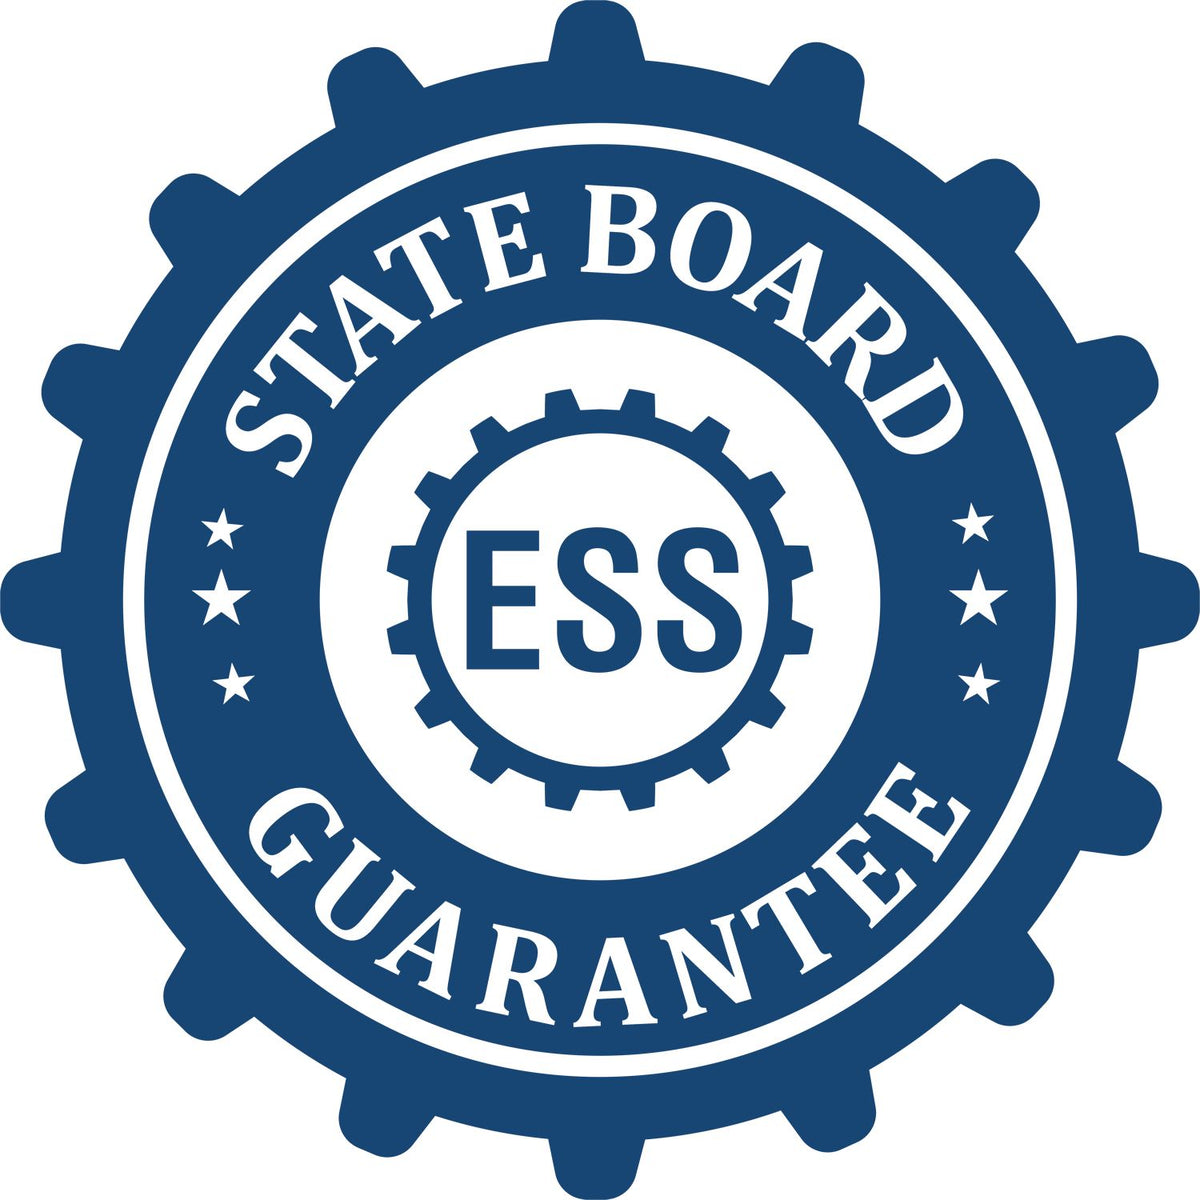 An emblem in a gear shape illustrating a state board guarantee for the Heavy Duty Cast Iron Texas Engineer Seal Embosser product.